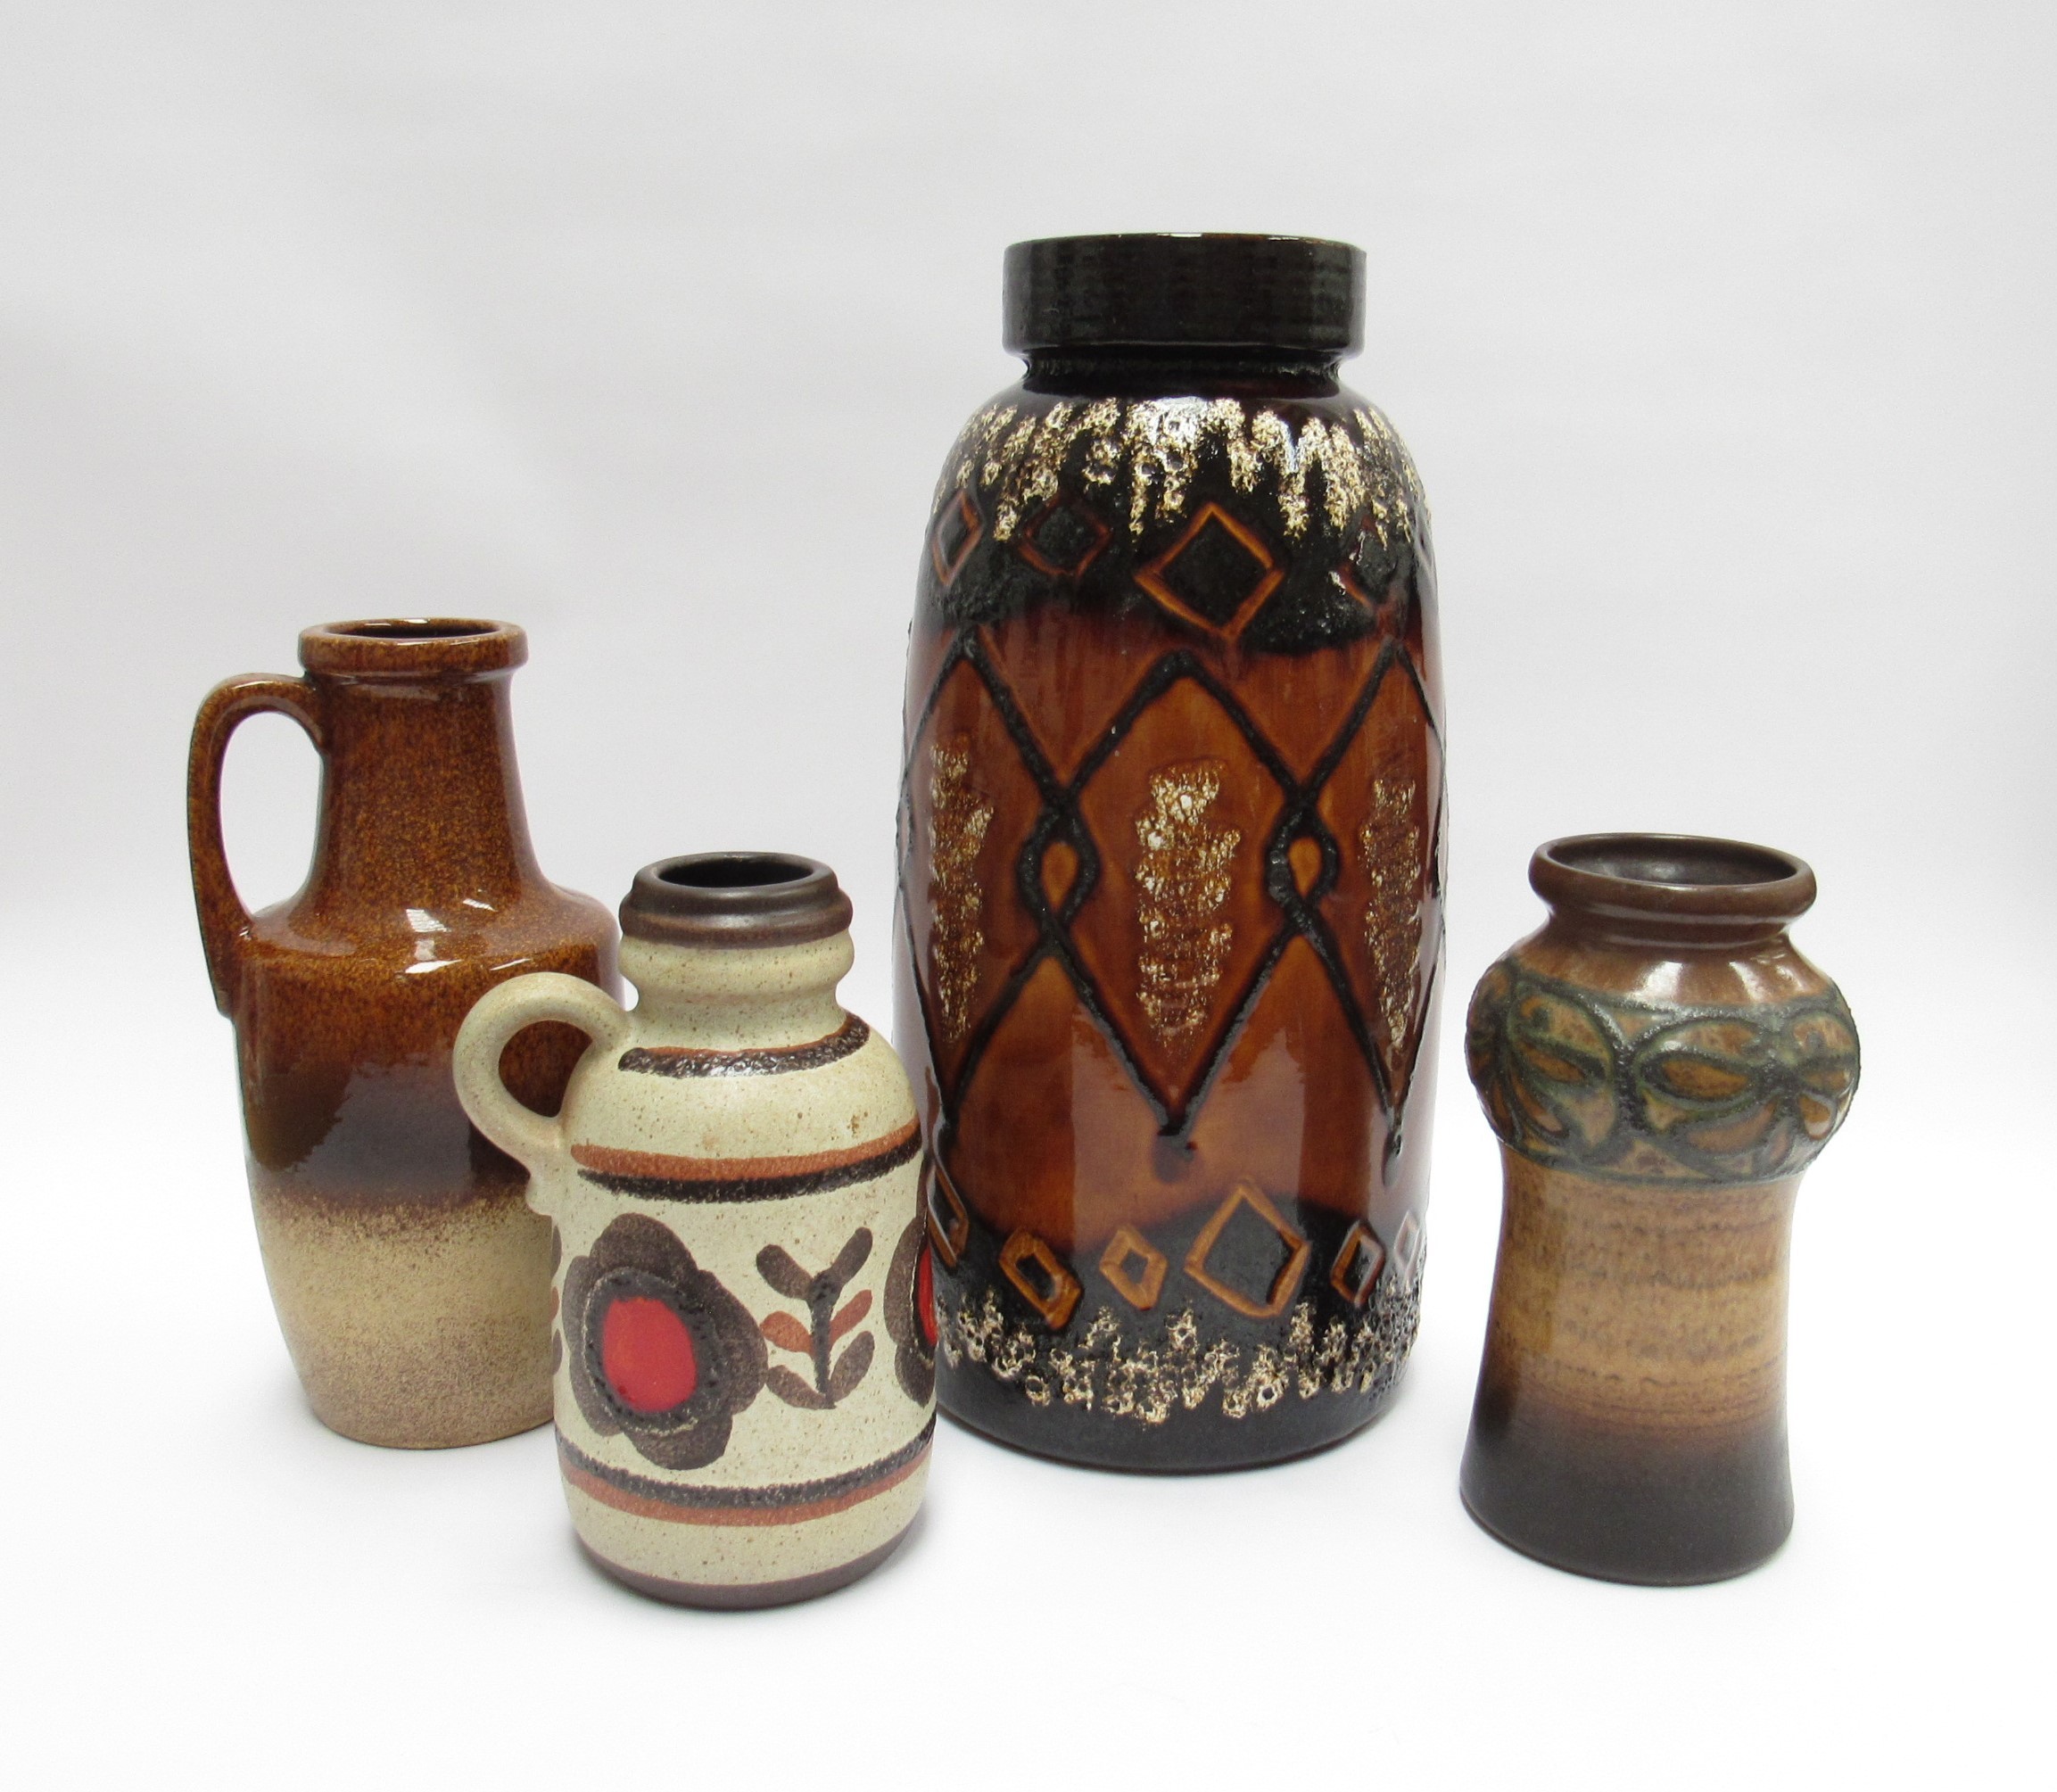 Four West/East German Pottery vases including Strehla, treacle and brown glazes. Tallest 38cm